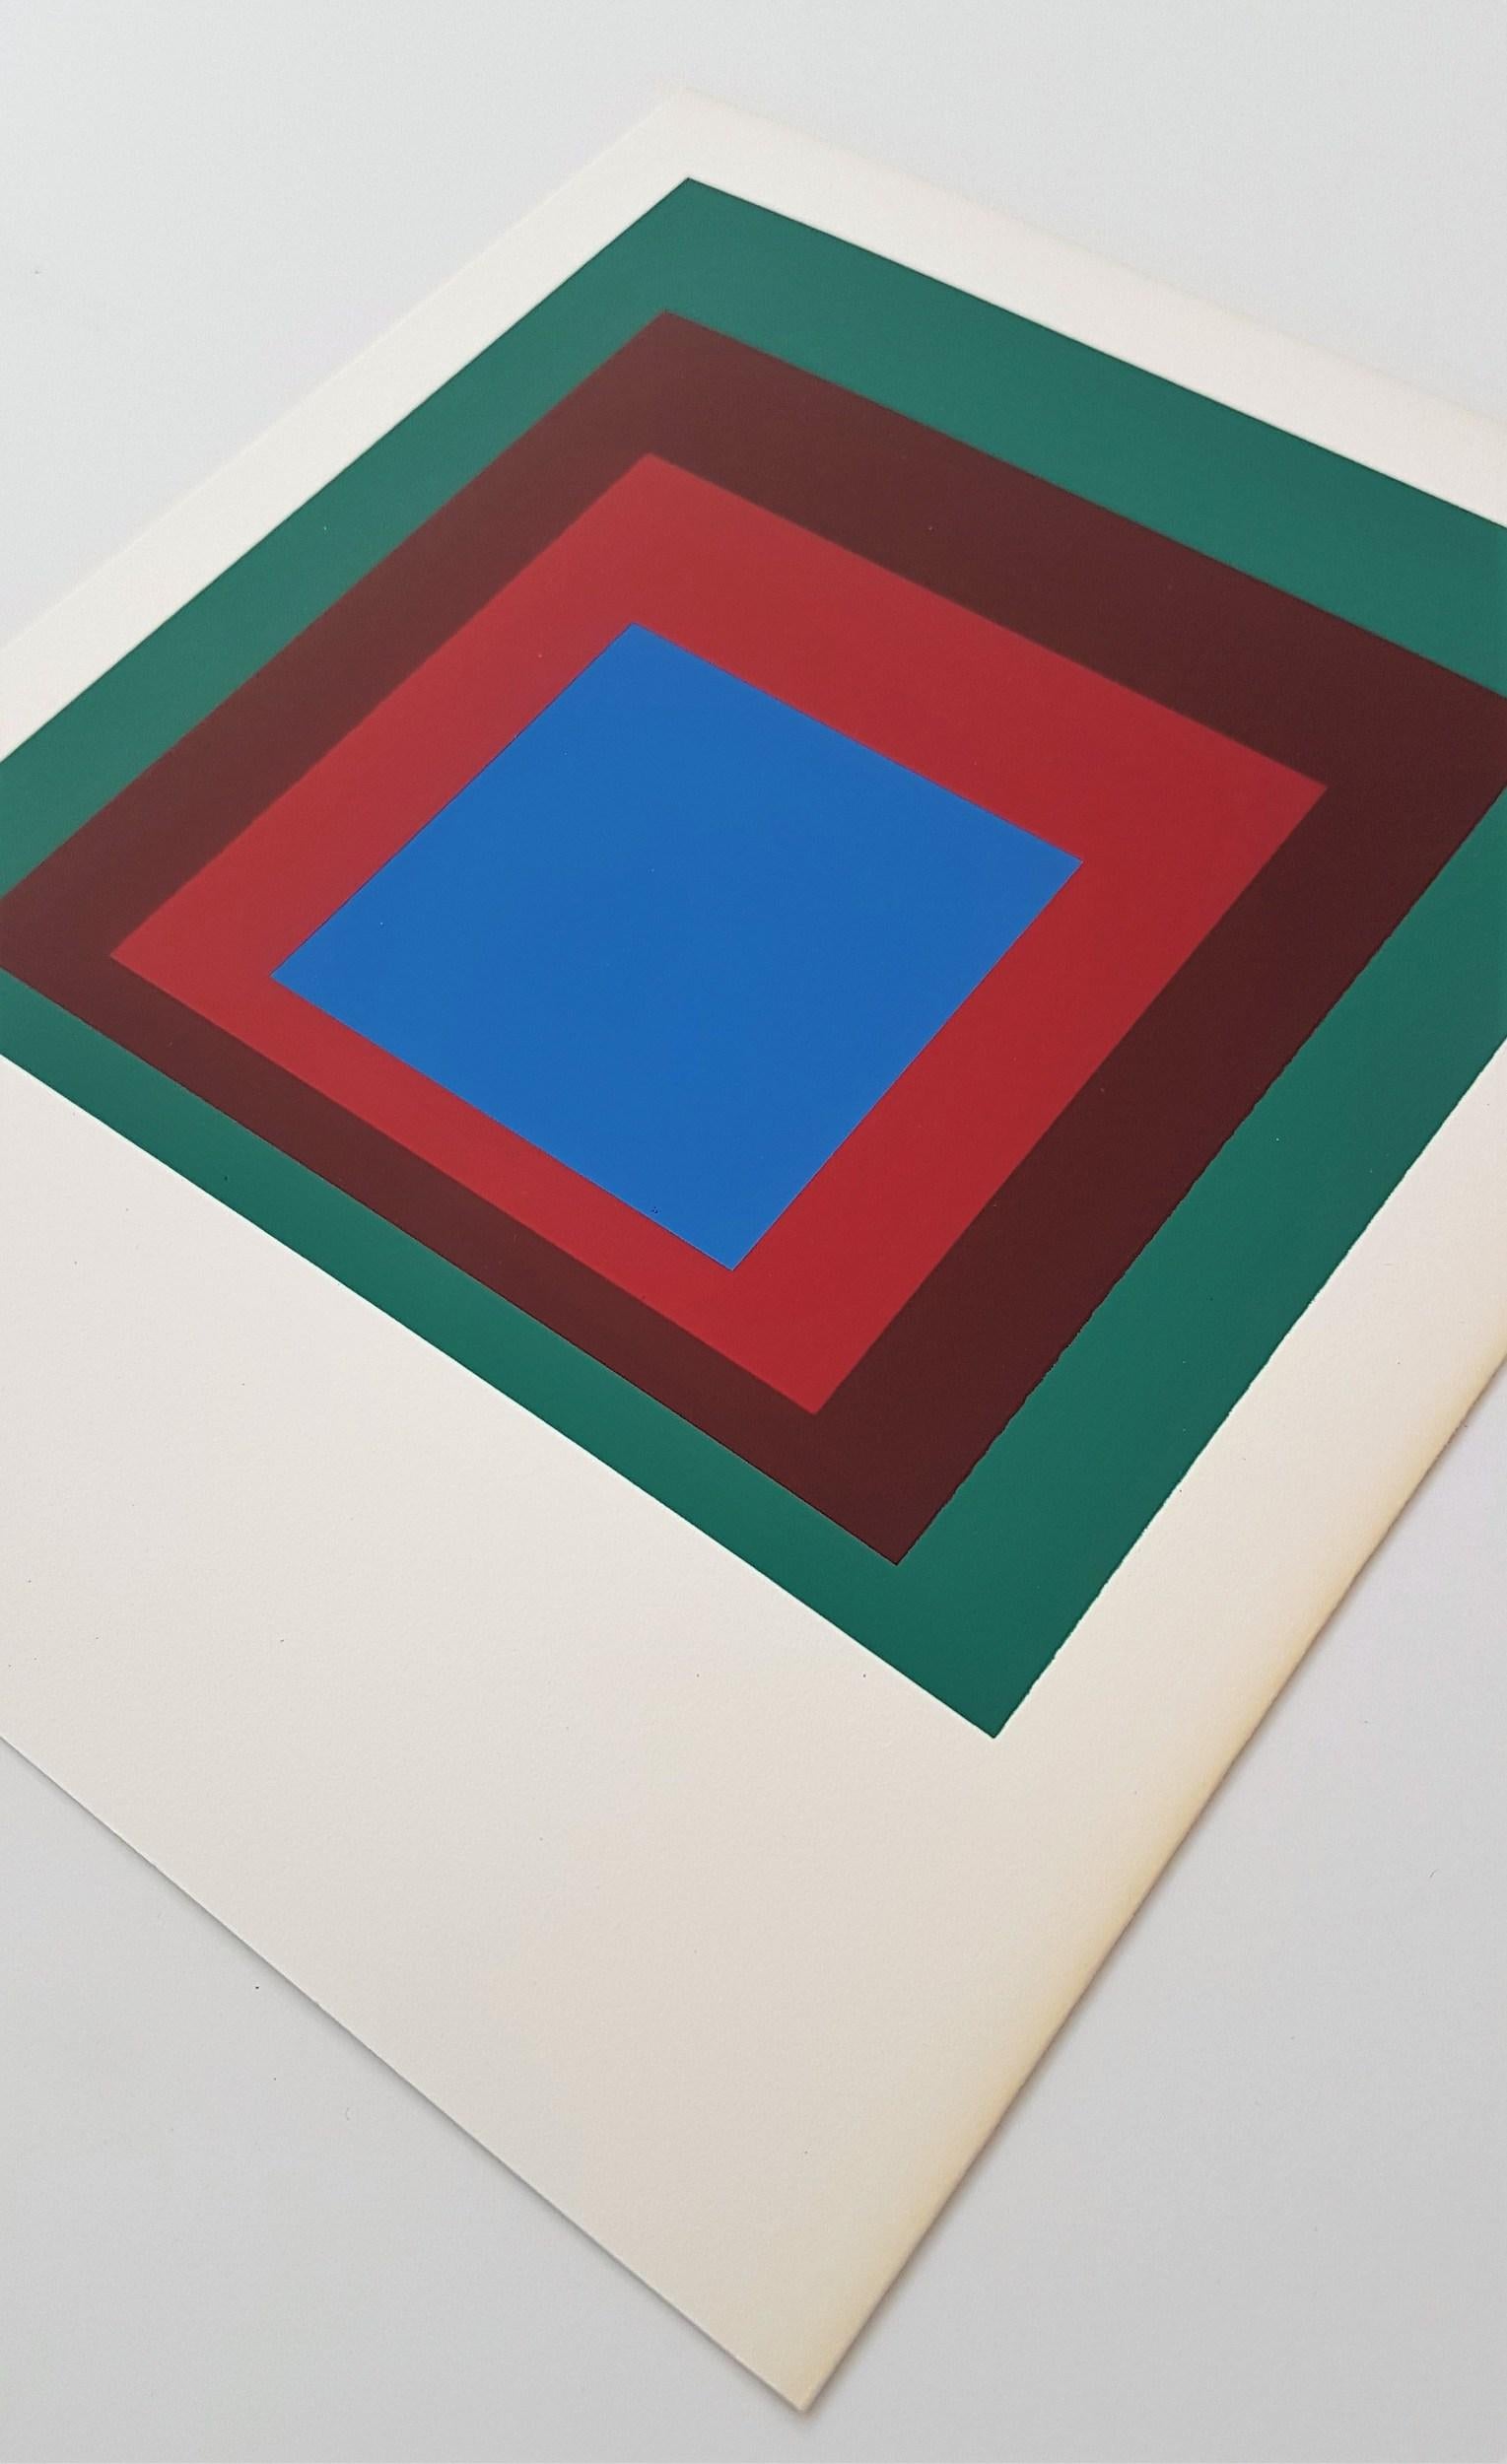 Homage to the Square: Protected Blue (~28% OFF LIST PRICE - LIMITED TIME ONLY) - Color-Field Print by (after) Josef Albers